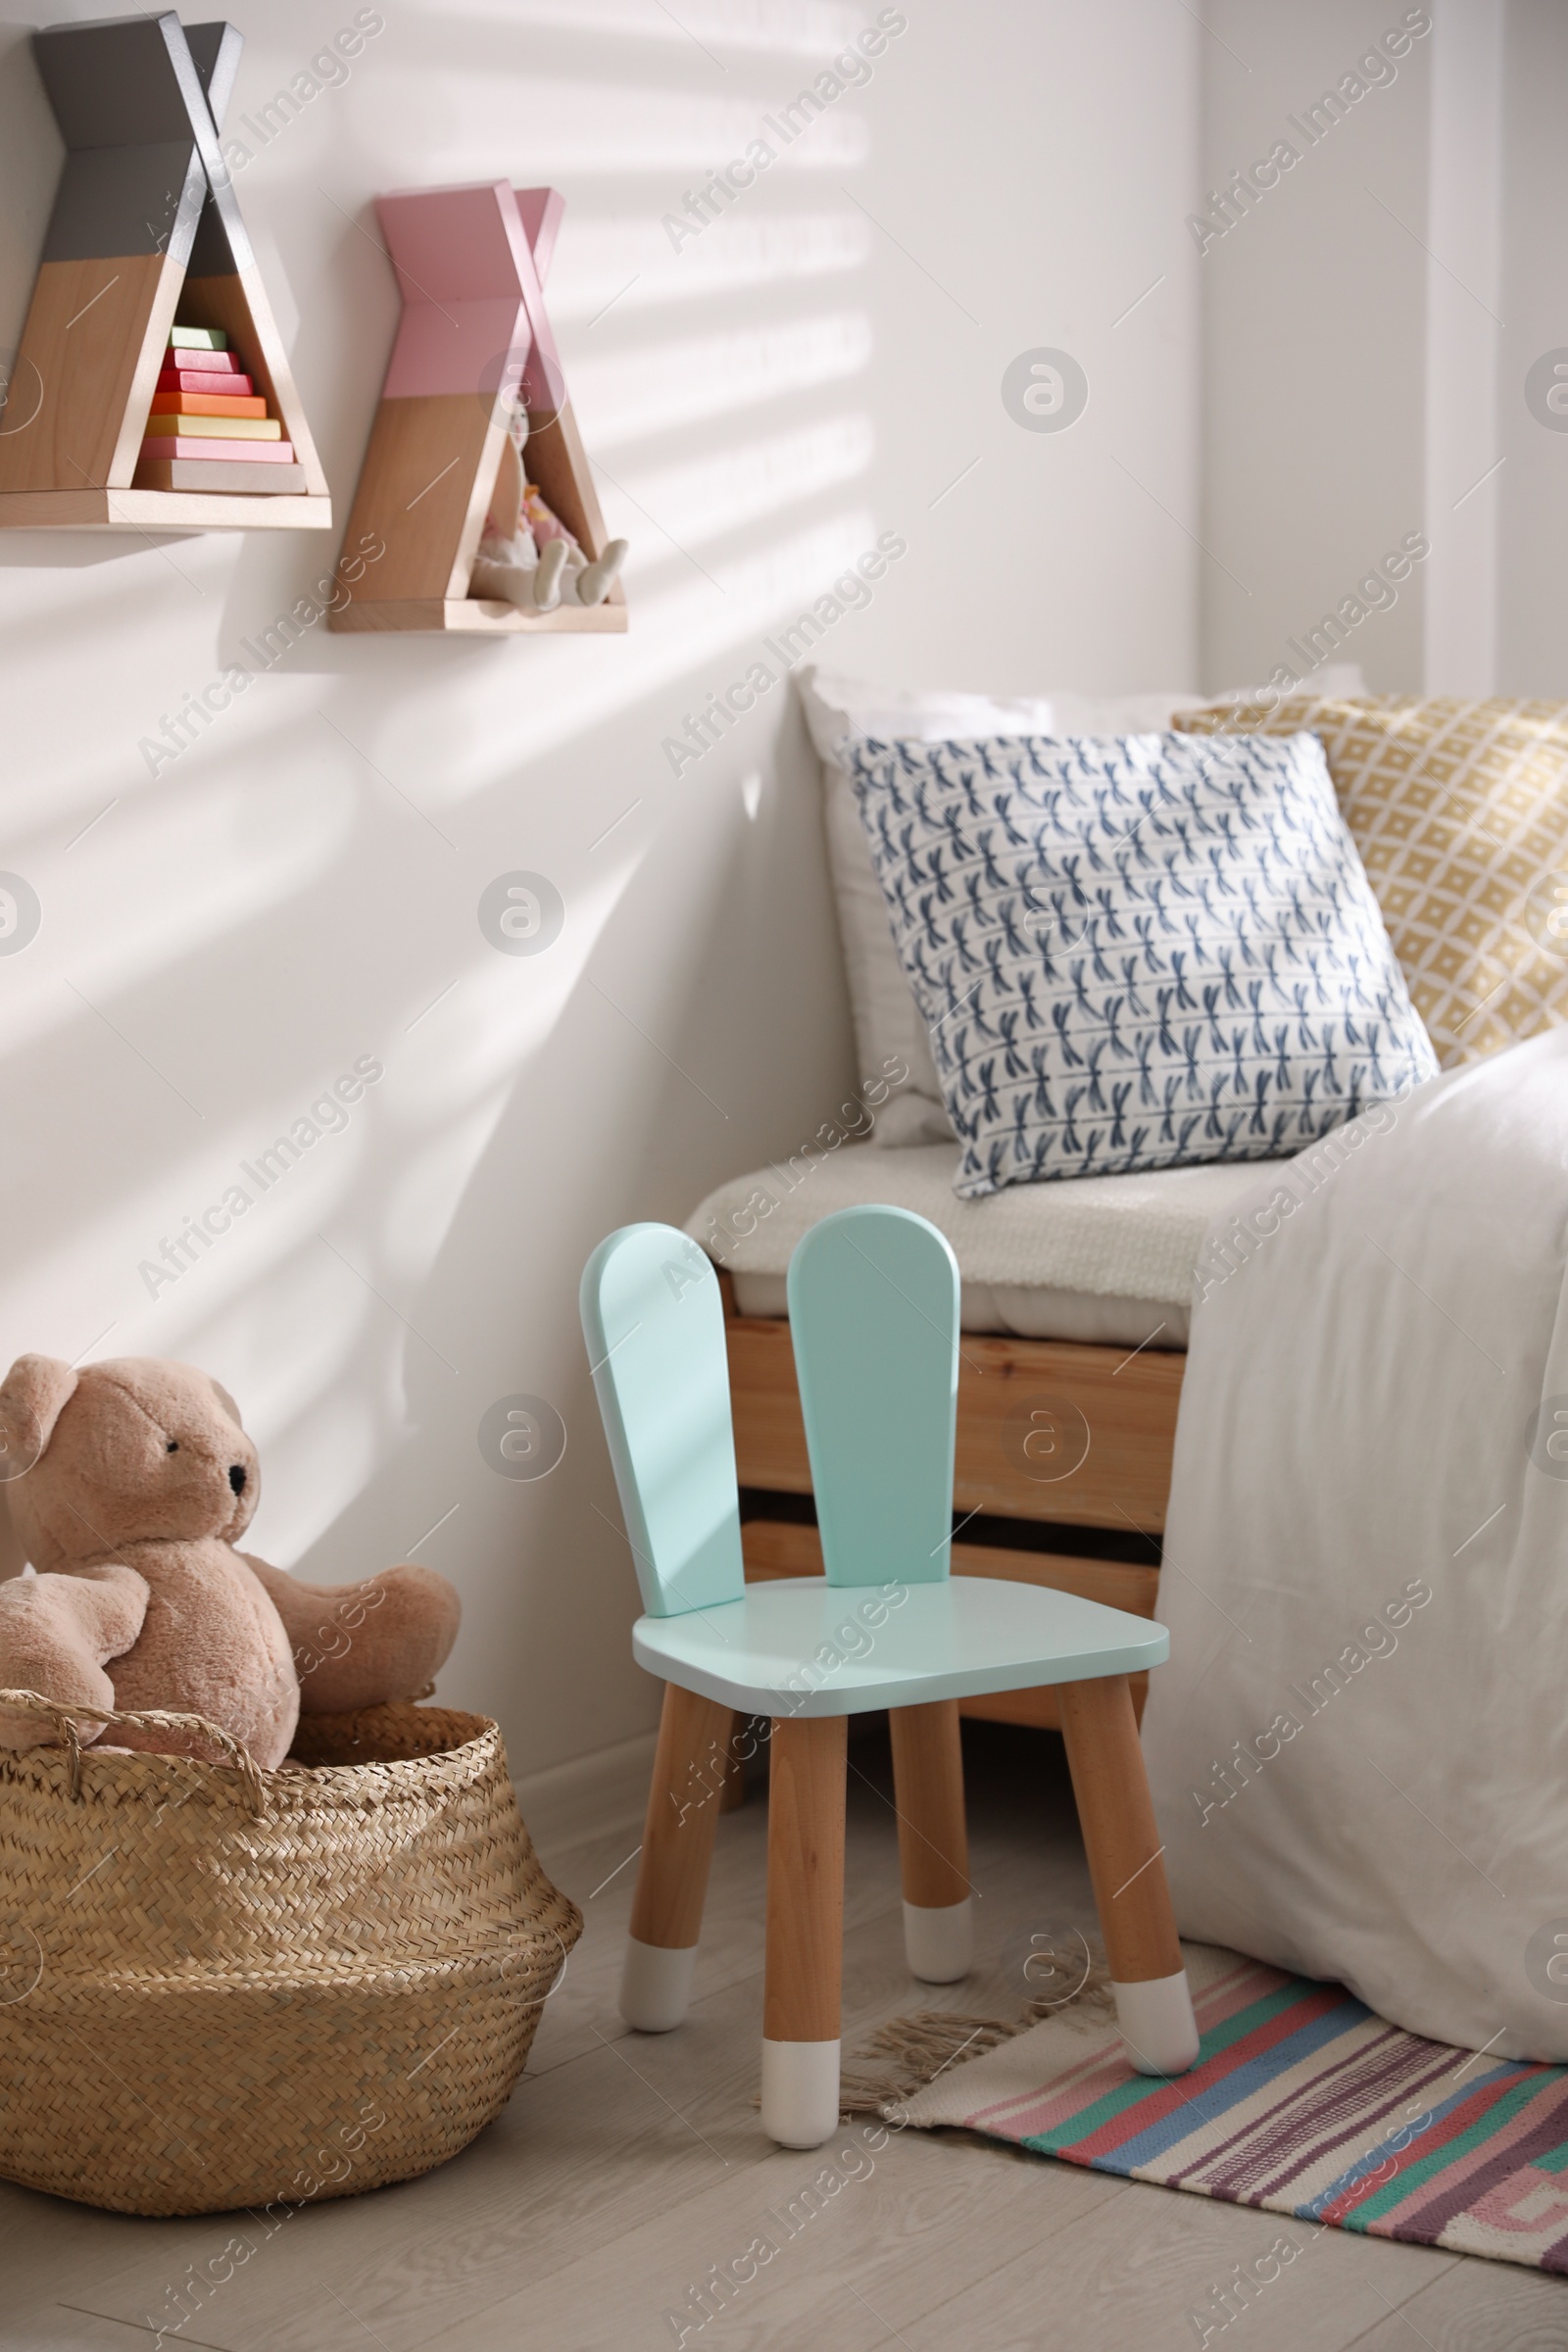 Photo of Cute little chair with bunny ears near bed indoors. Children's room interior